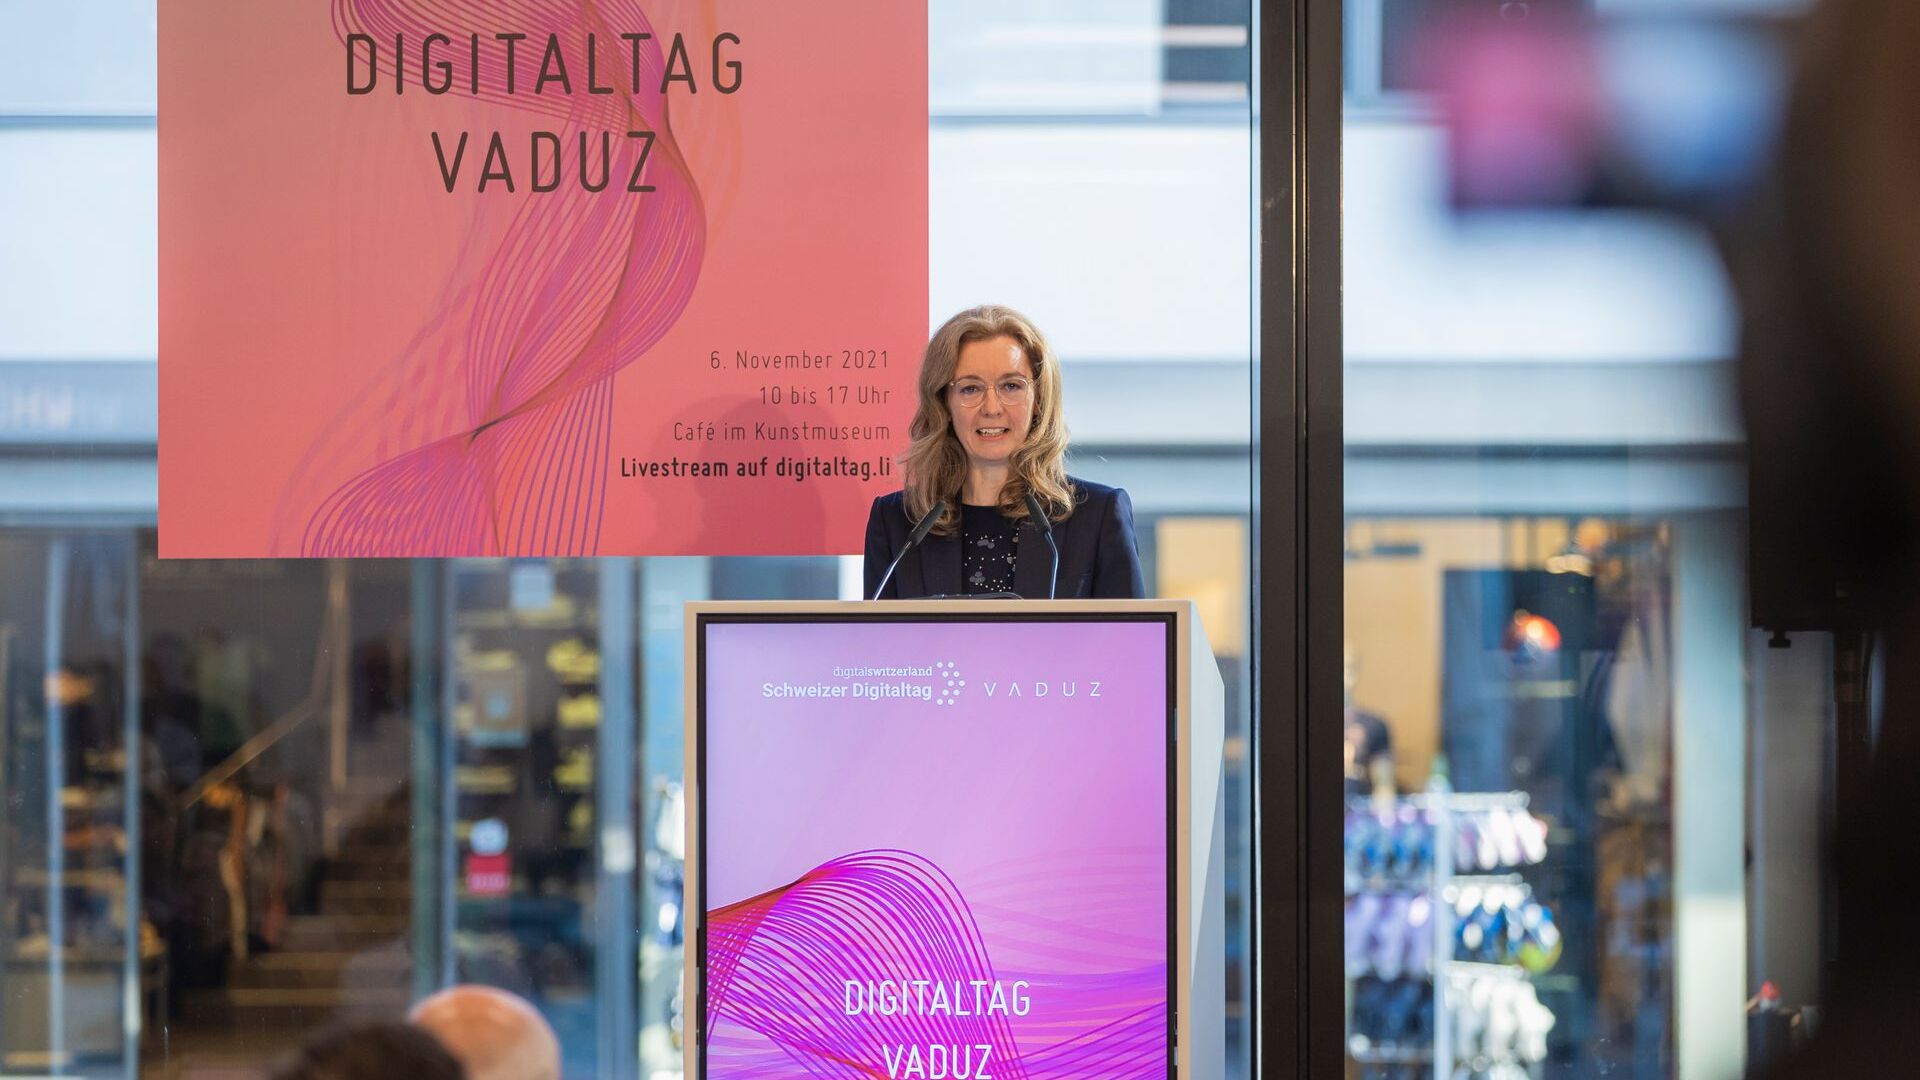 The "Digitaltag Vaduz", welcomed by the Kunstmuseum of the capital of the Principality of Liechtenstein on Saturday 6 November 2021, aroused the enthusiasm of the public and speakers in analogy with the "Swiss Digital Day" of the following day 10: the intervention of the Deputy Prime Minister Sabine Mounani